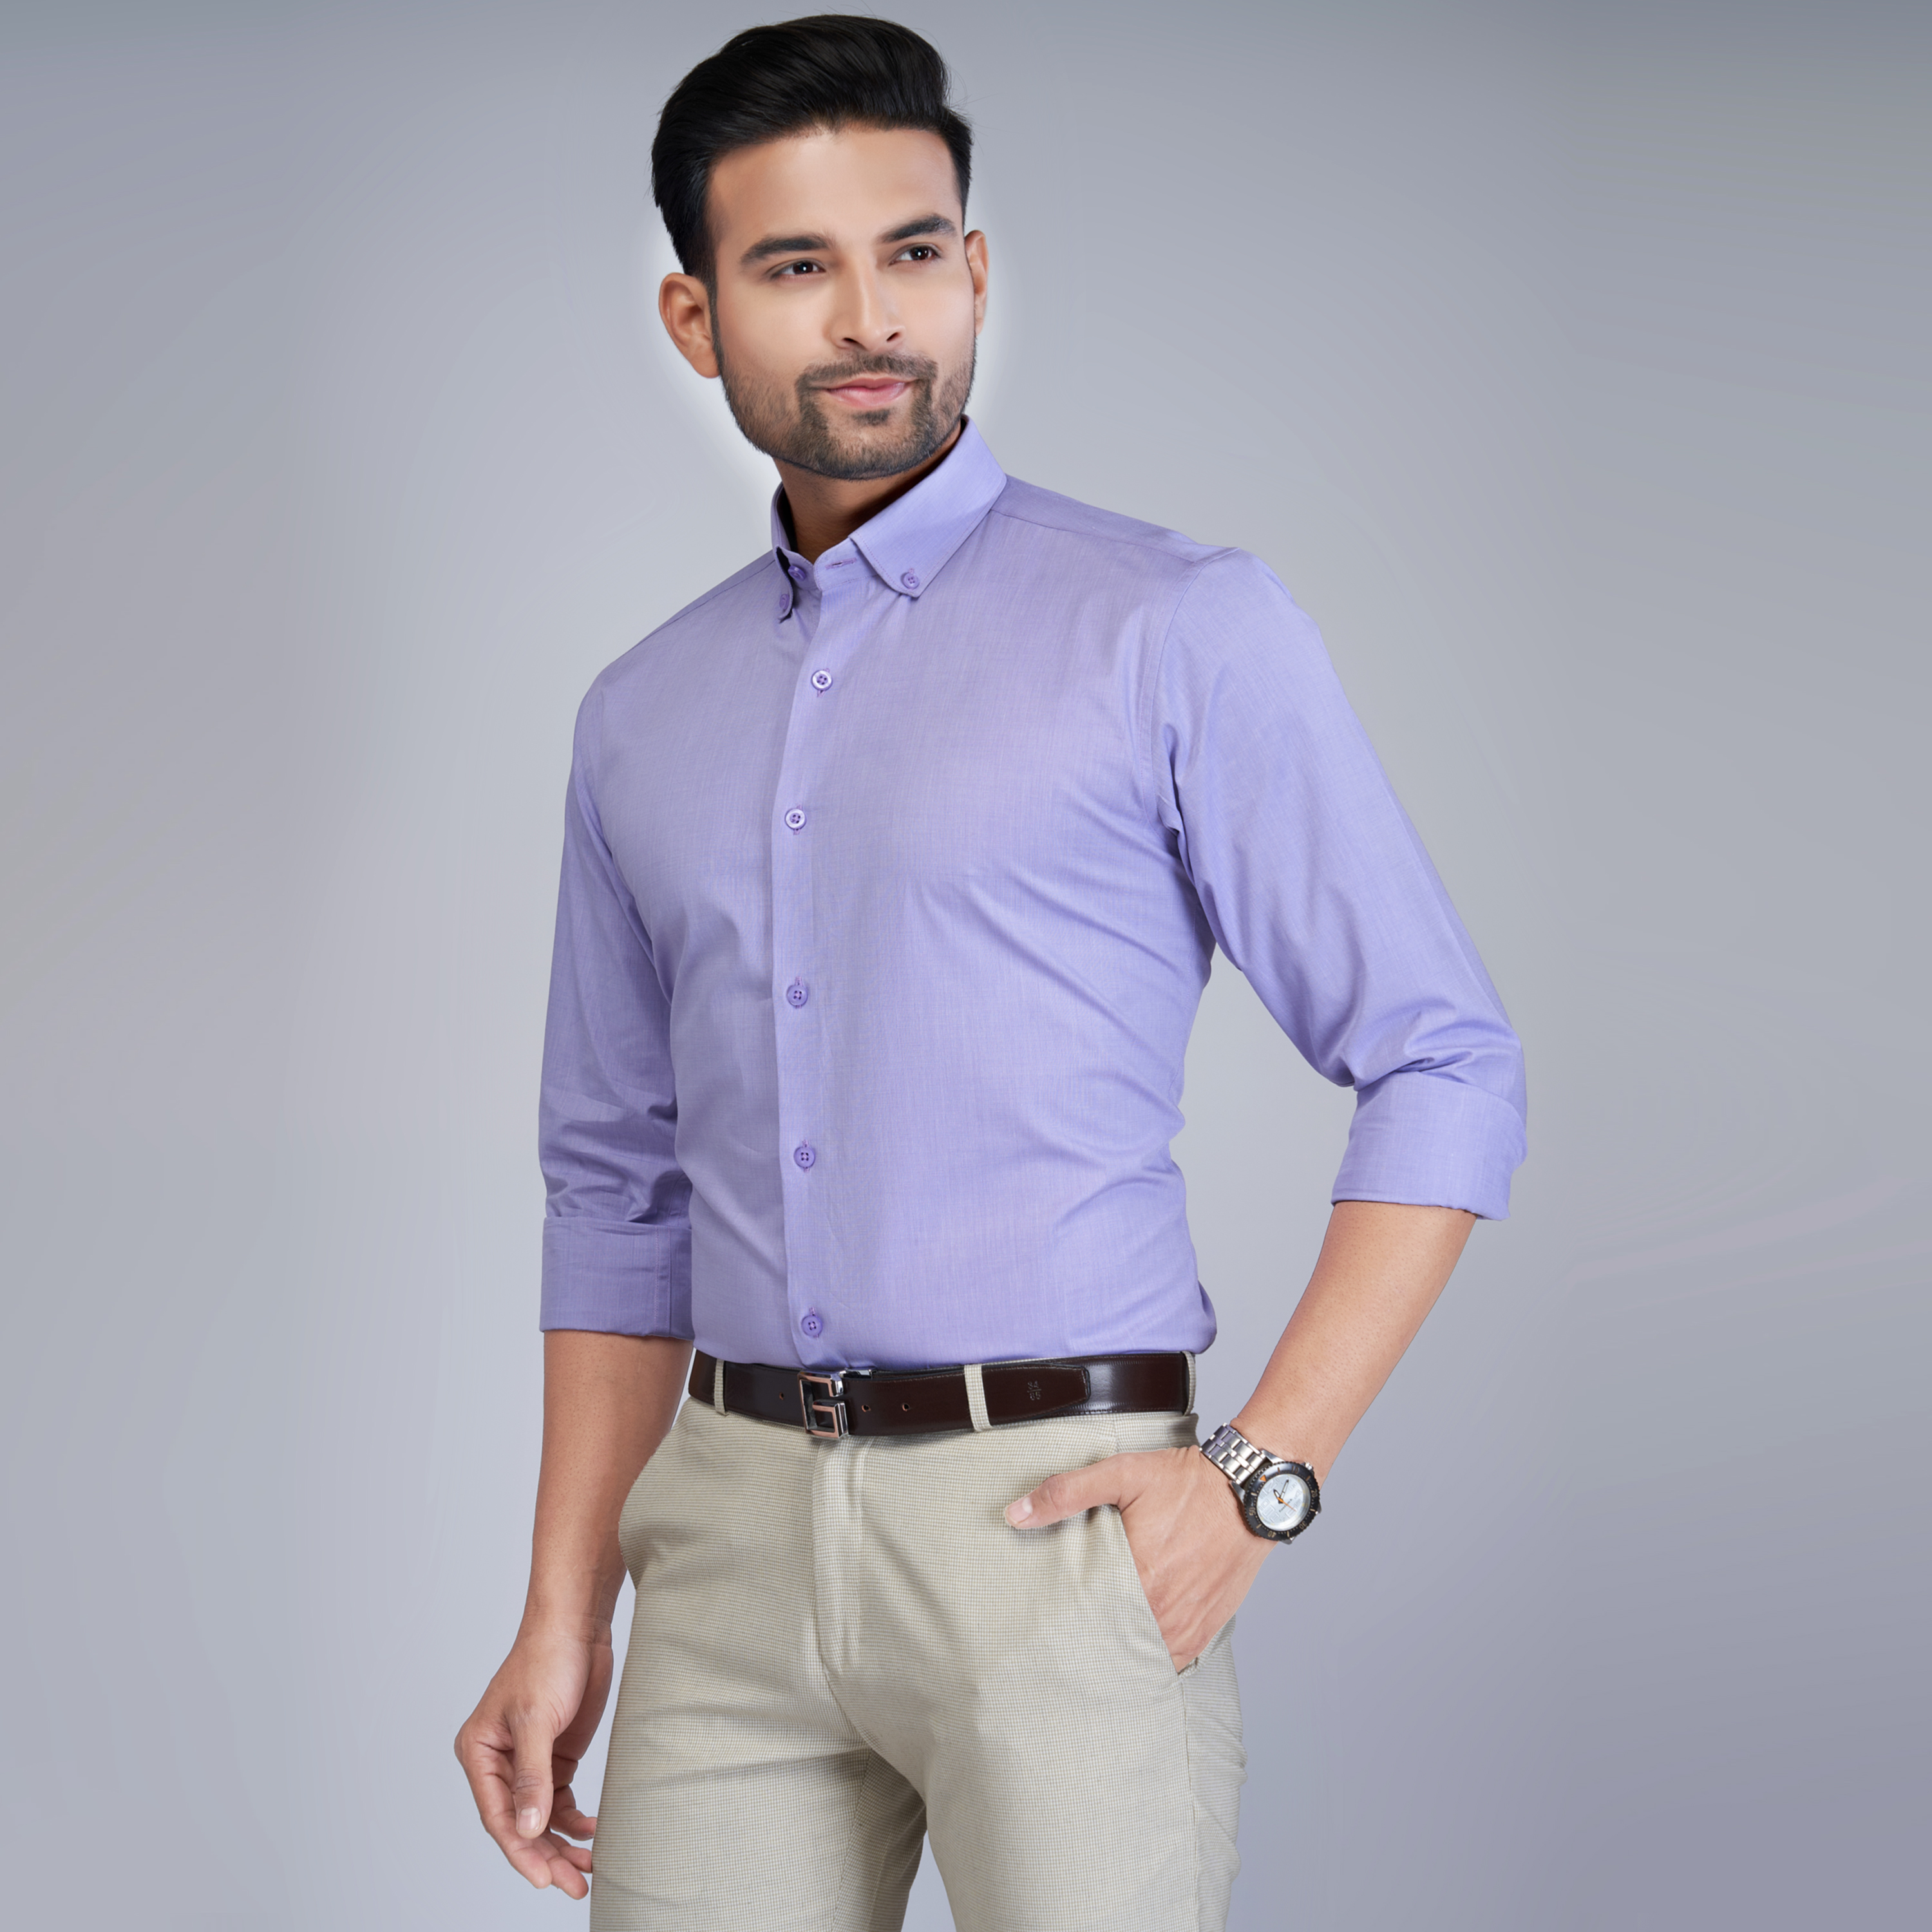 Men's Shirts for Formal Events